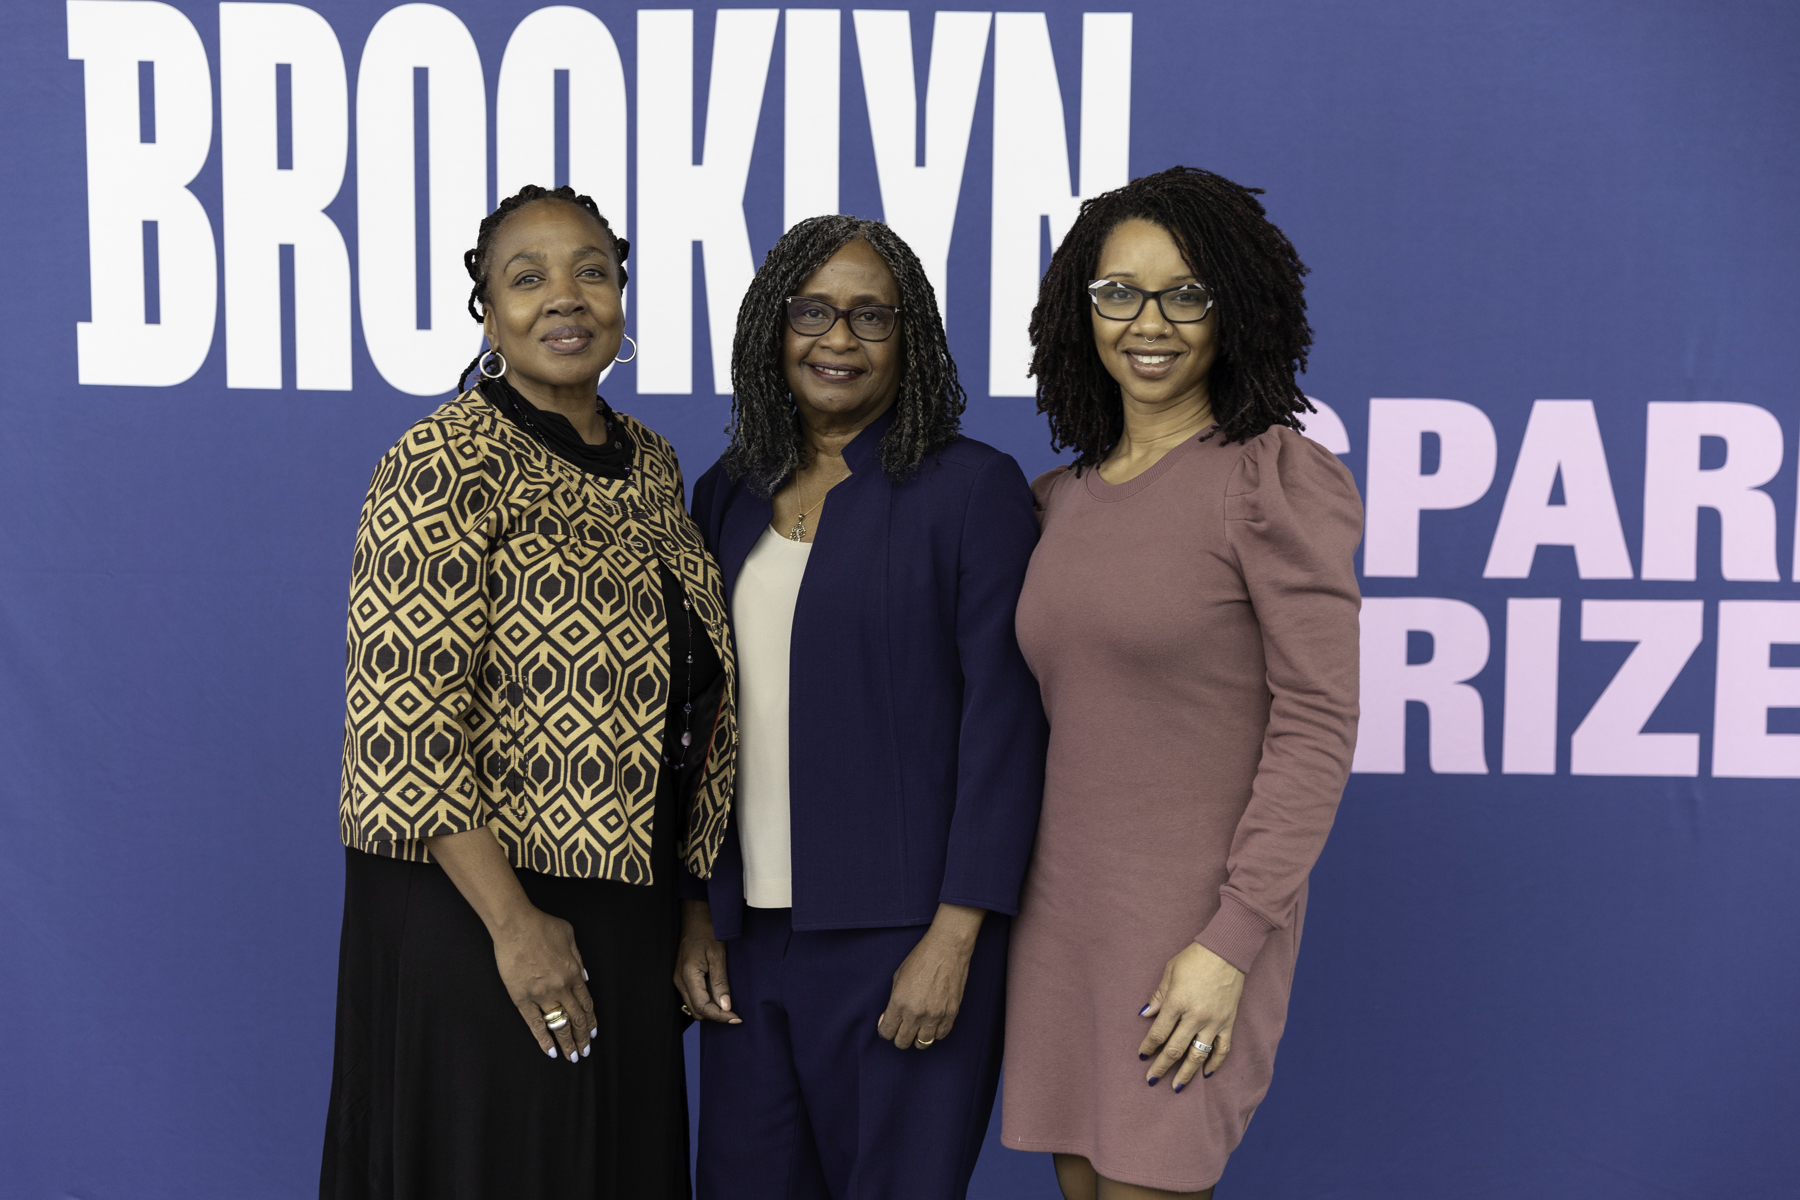 Three women smiling and posing together in front of a blue backdrop with the word "brooklyn.